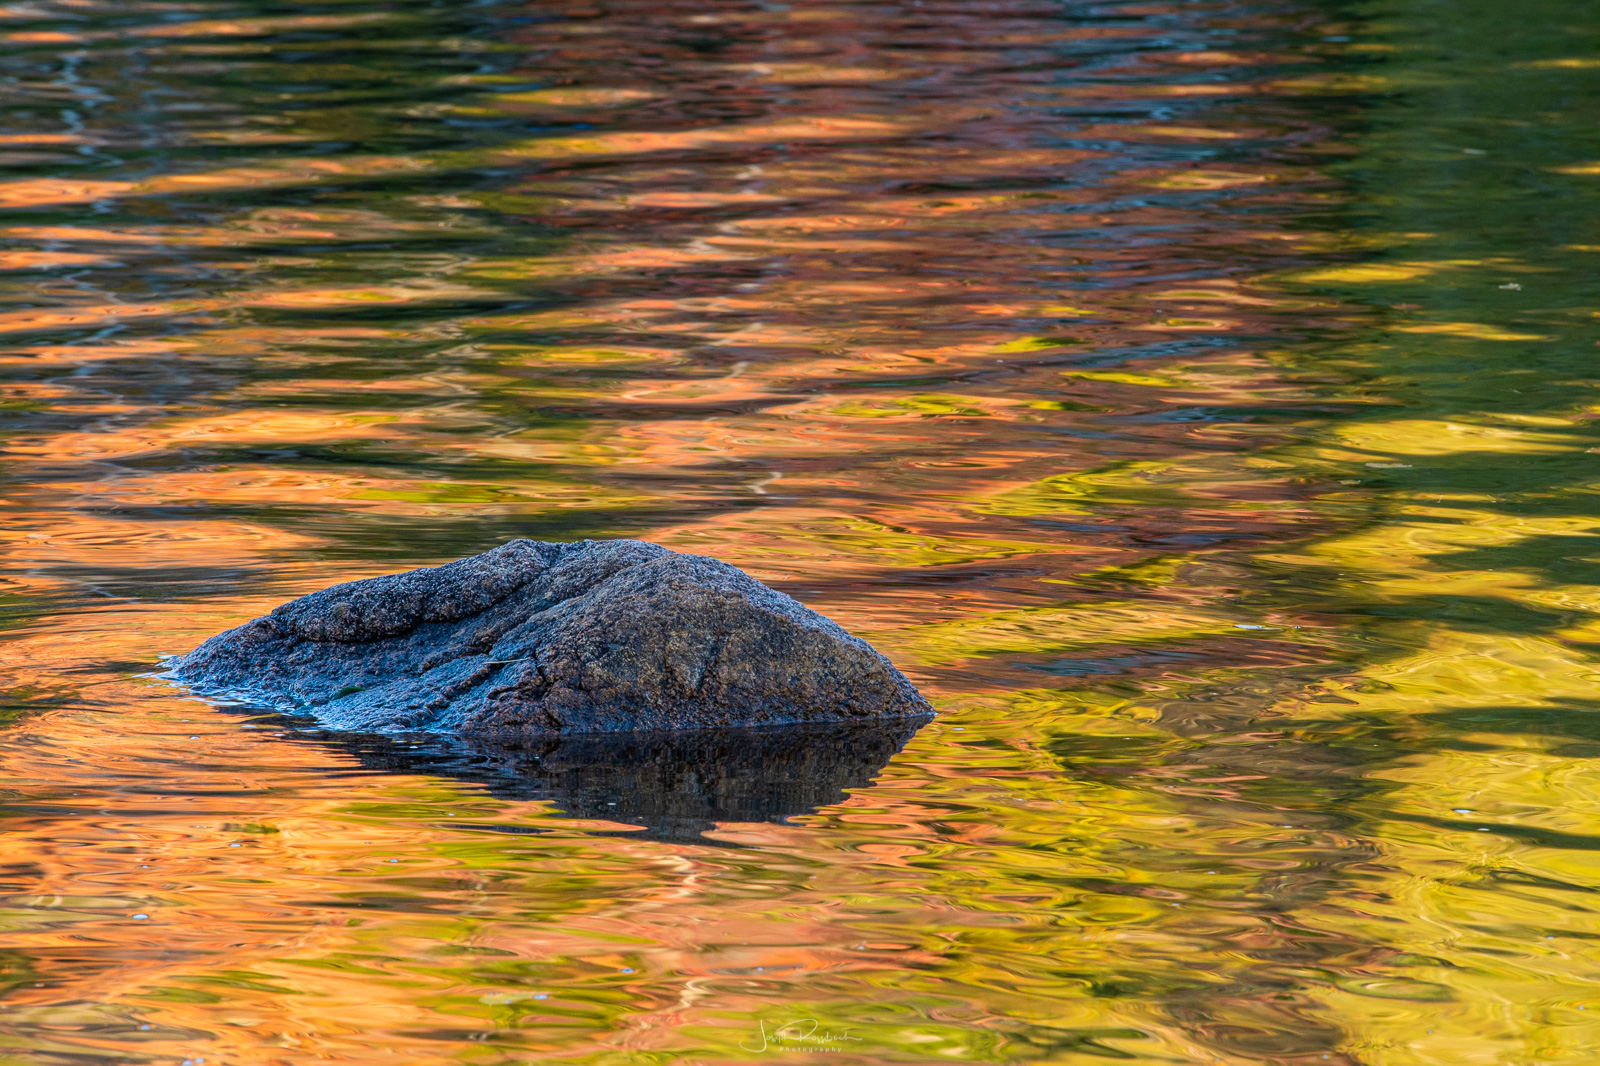 Acadia, Fall, Maine, autumn, color, colorful, jordan, national park, nature, photo, pond, reflections, rocks, scenic, united...